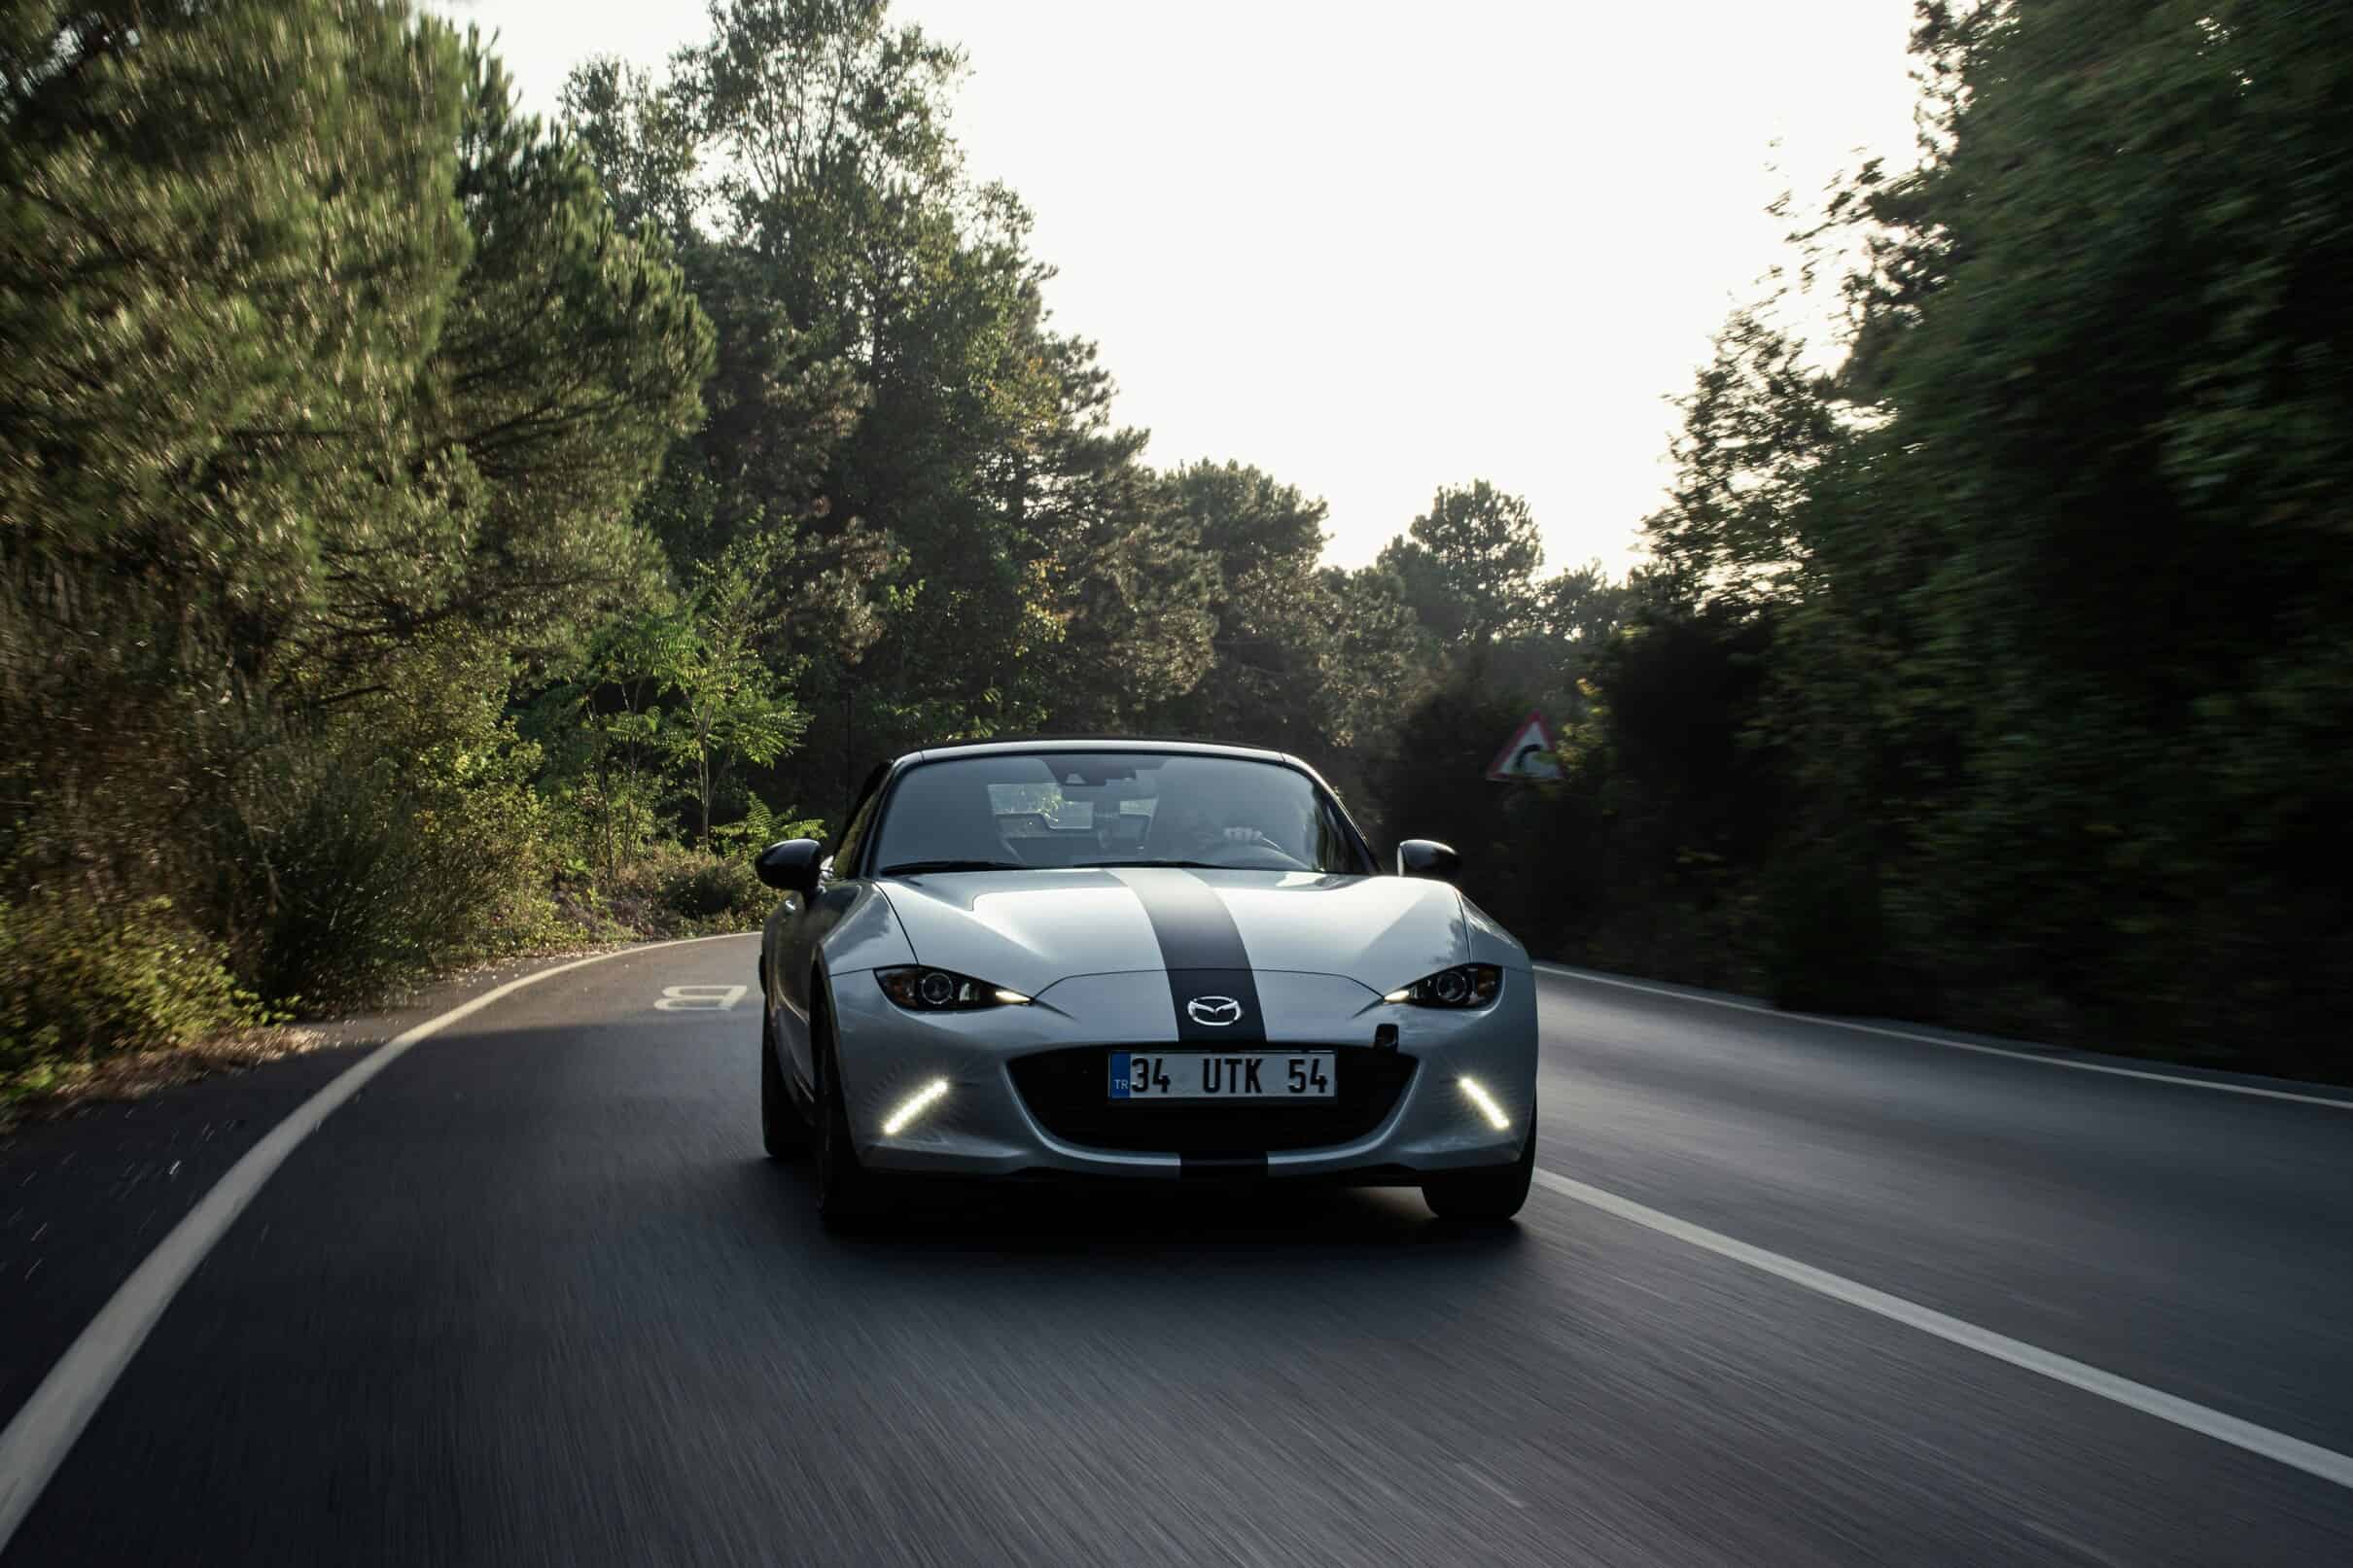 A red Mazda MX-5 convertible parked on a winding road, showcasing its sporty design and open-top motoring experience.